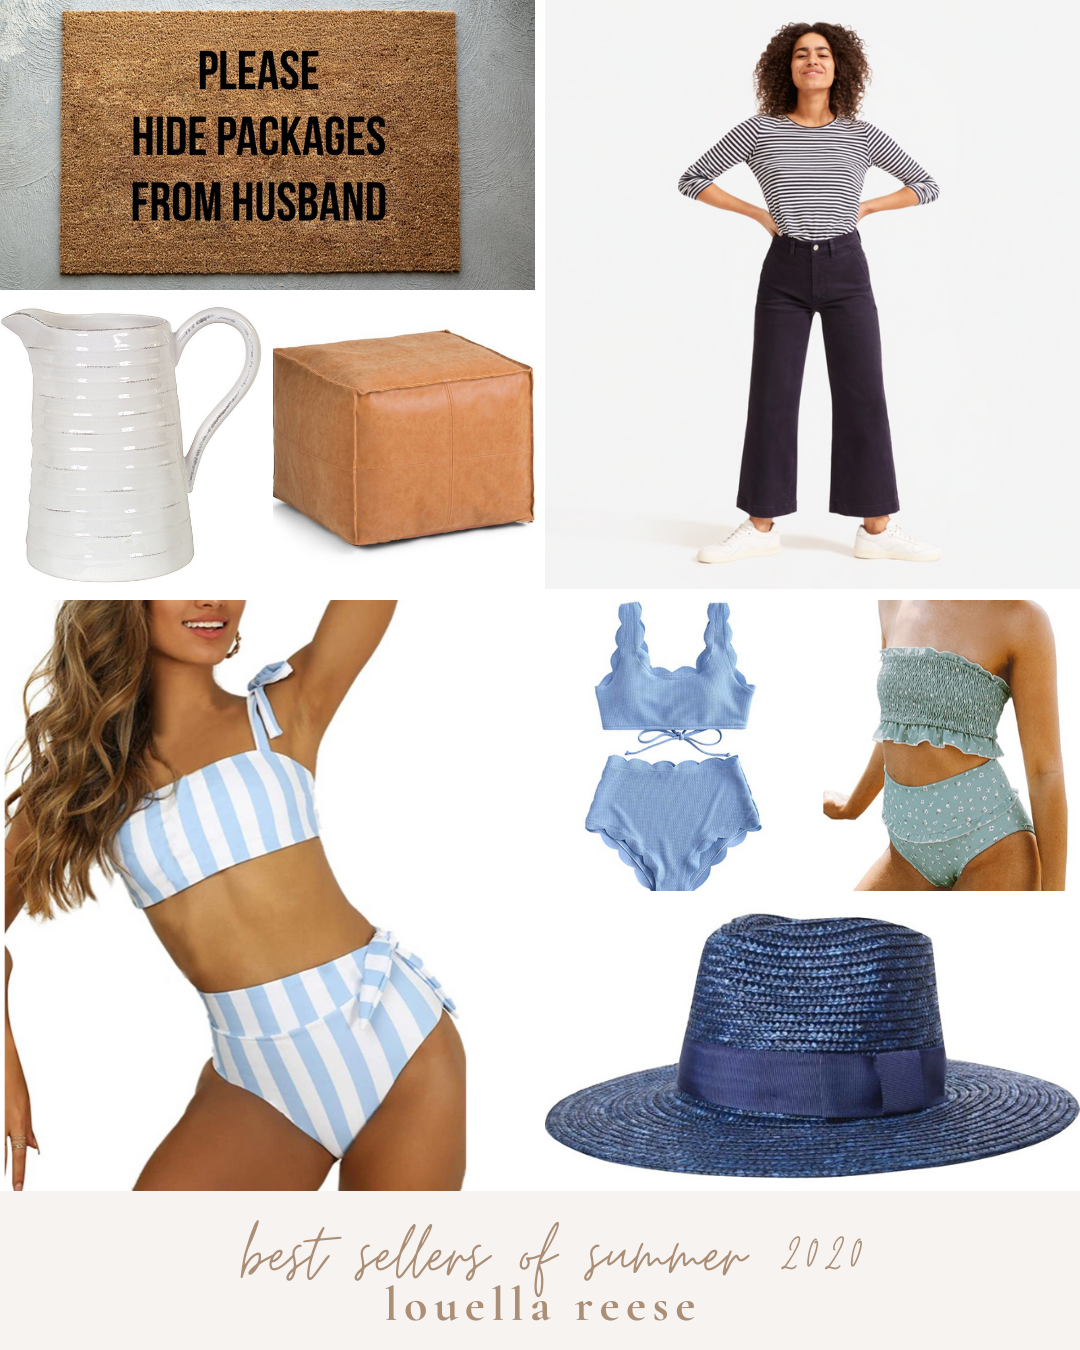 Best sellers of summer 2020 | Lifestyle | Louella Reese